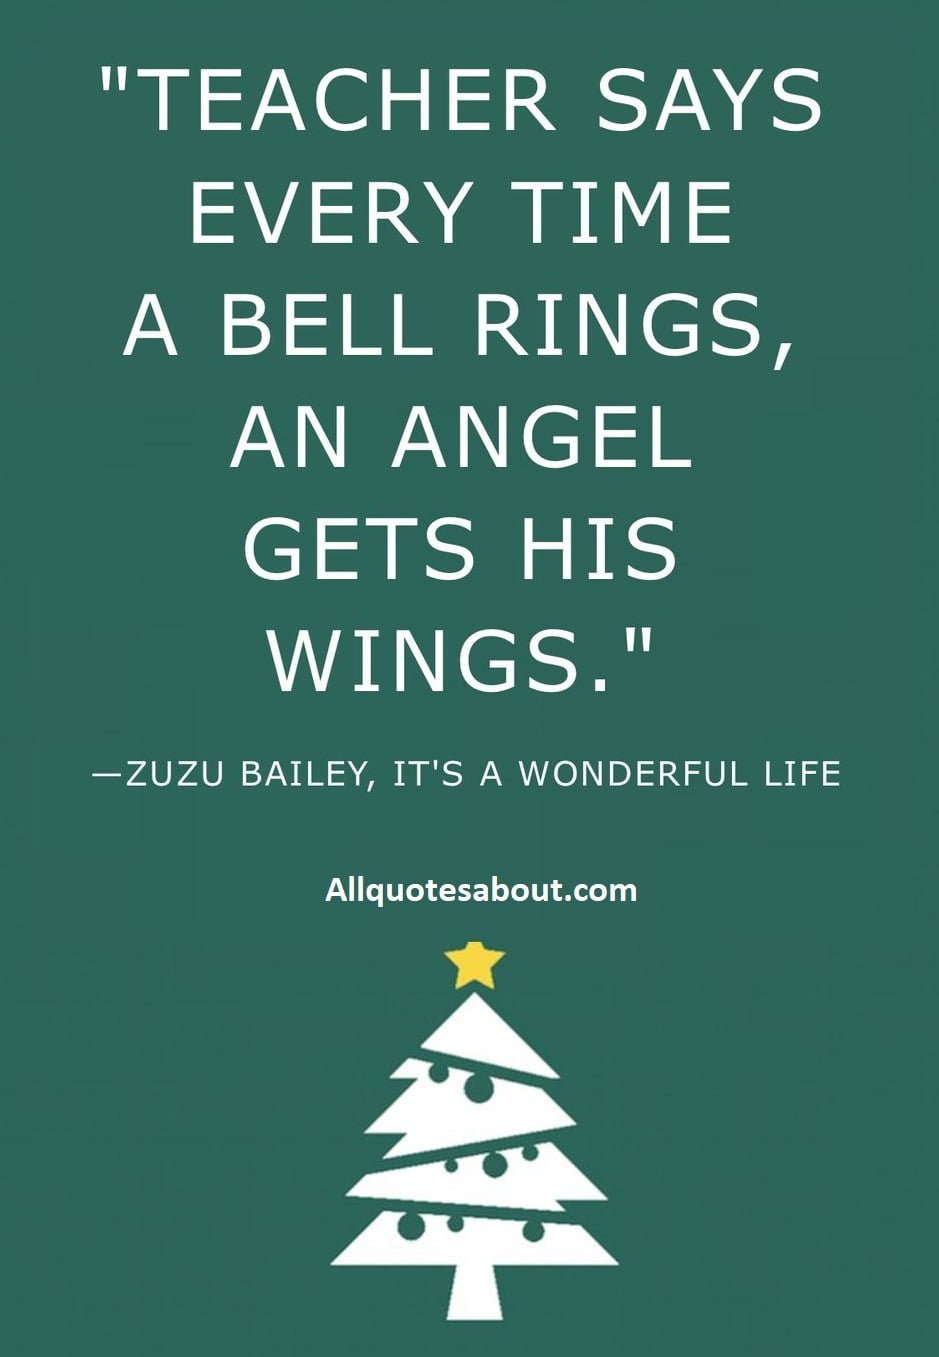 Merry Christmas Quotes